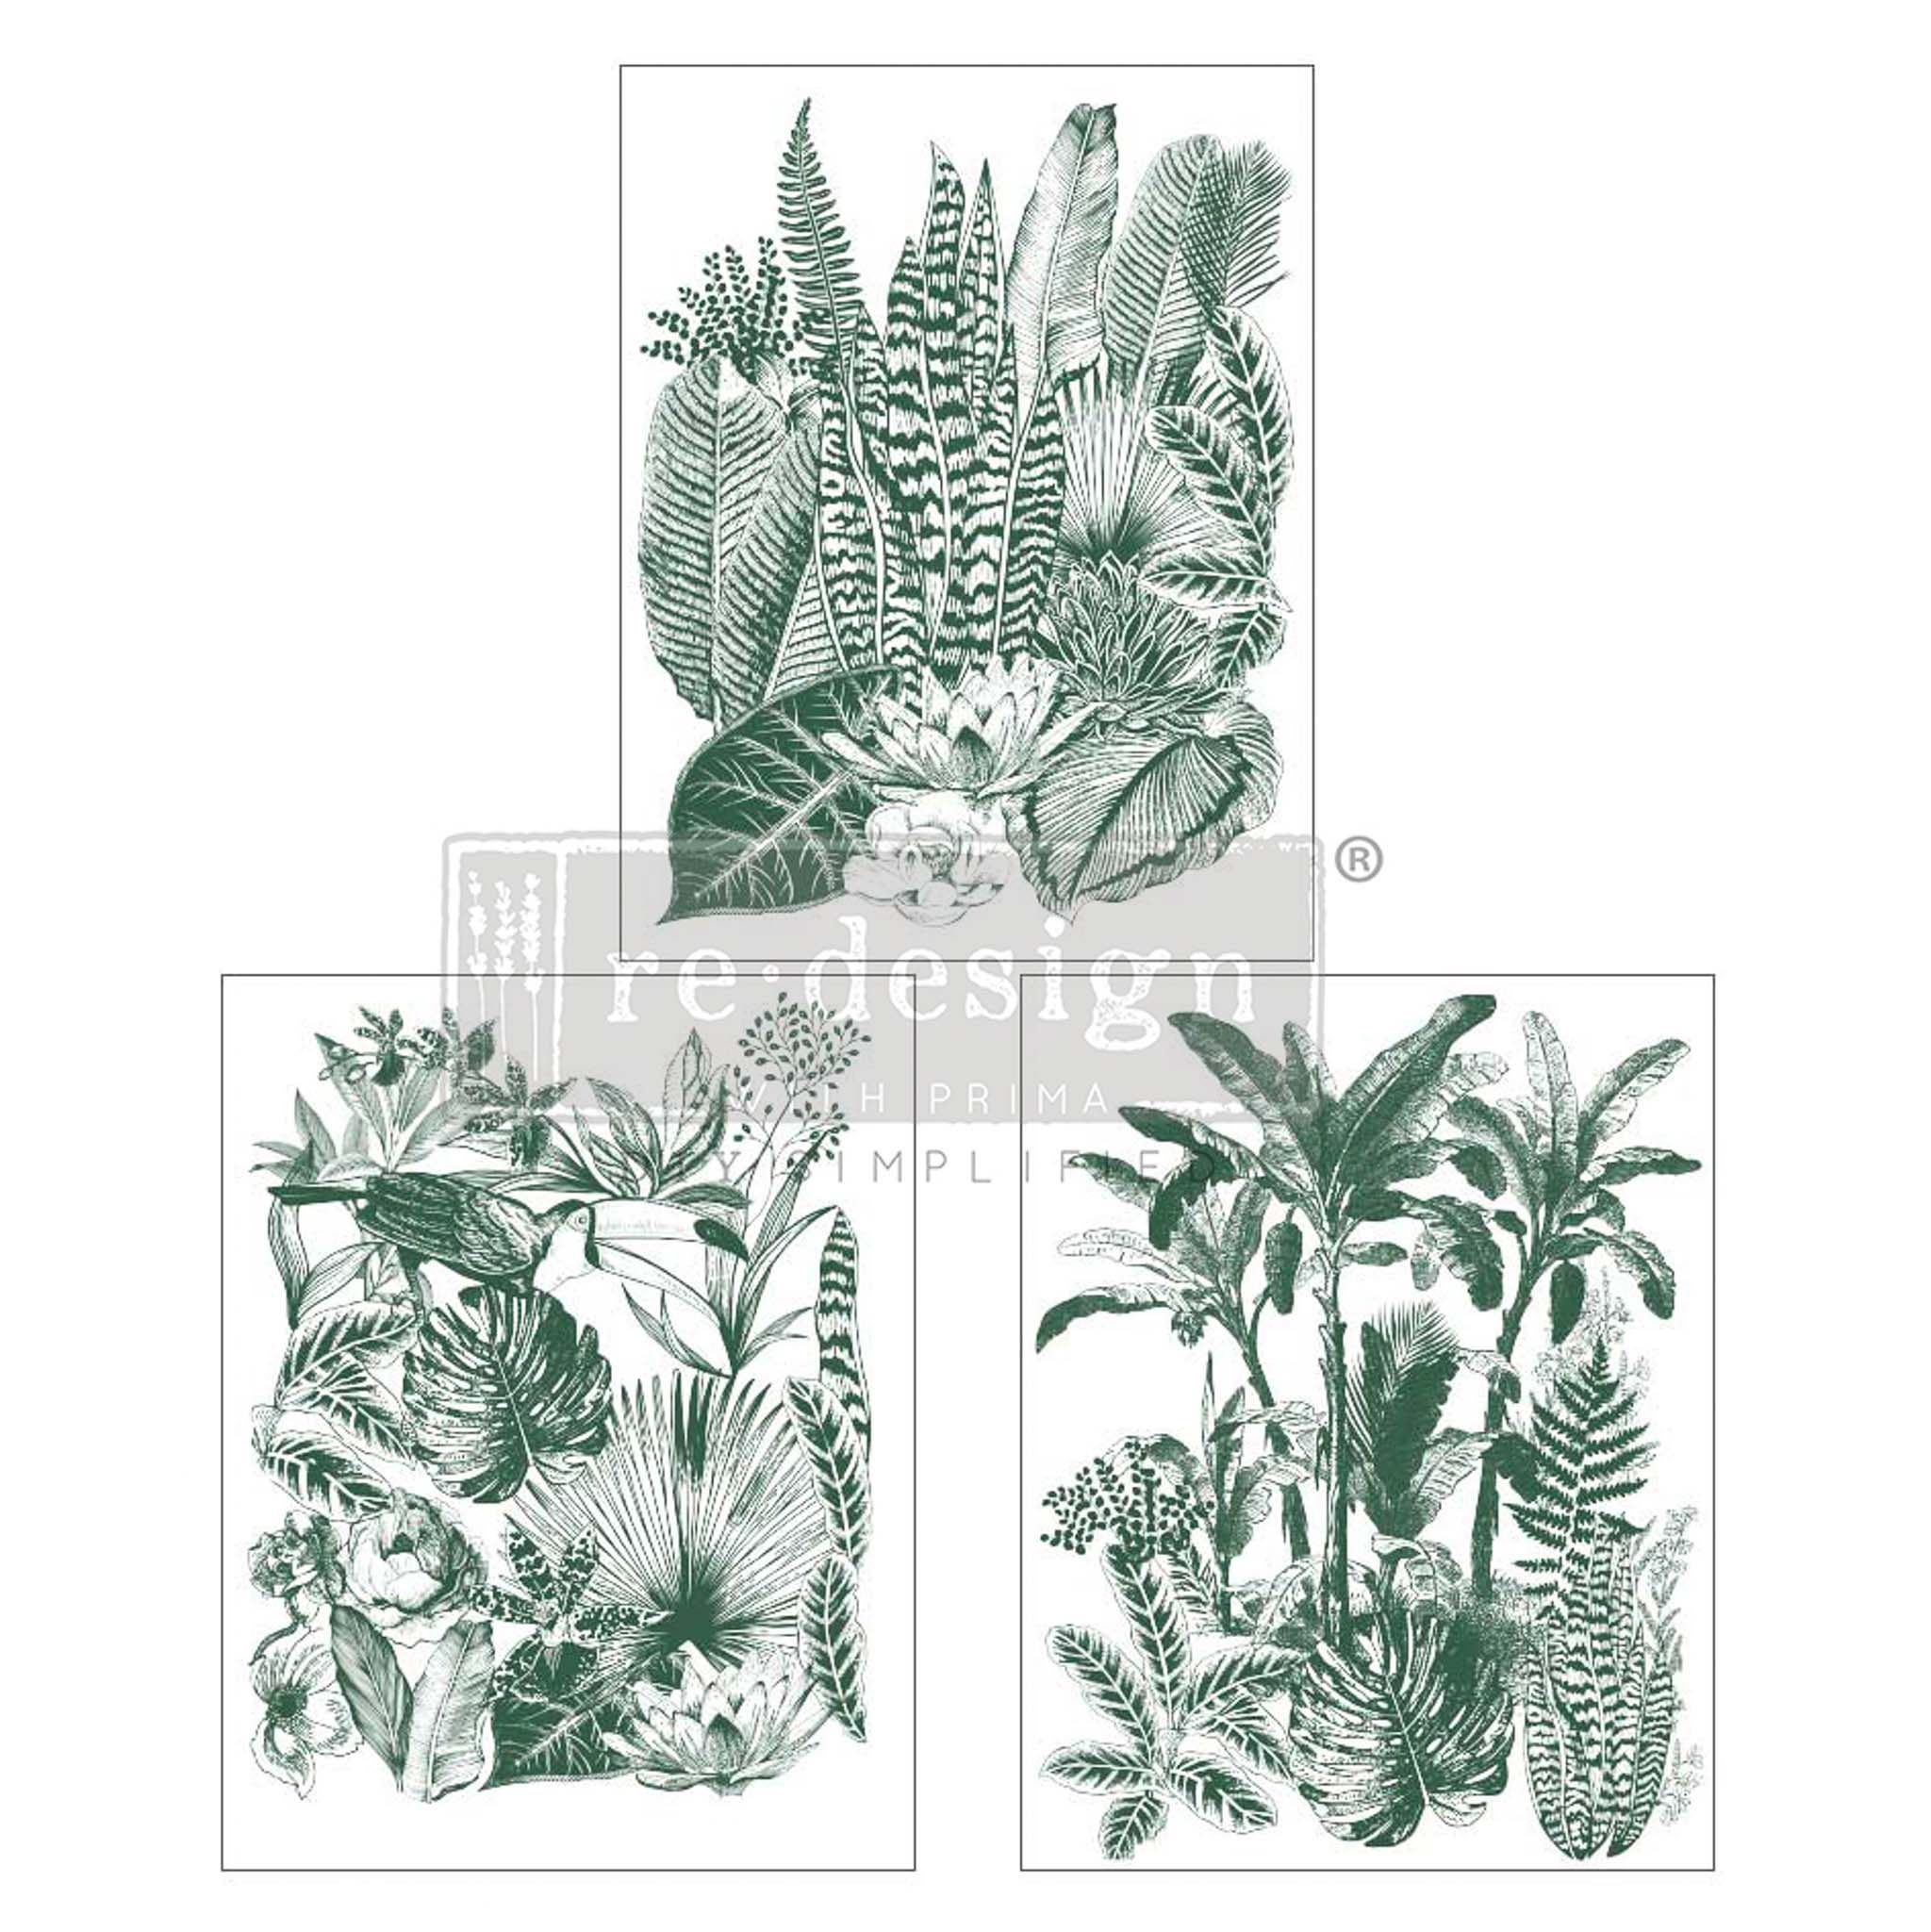 Three sheets of green monochromatic tropical foliage are against a white background.